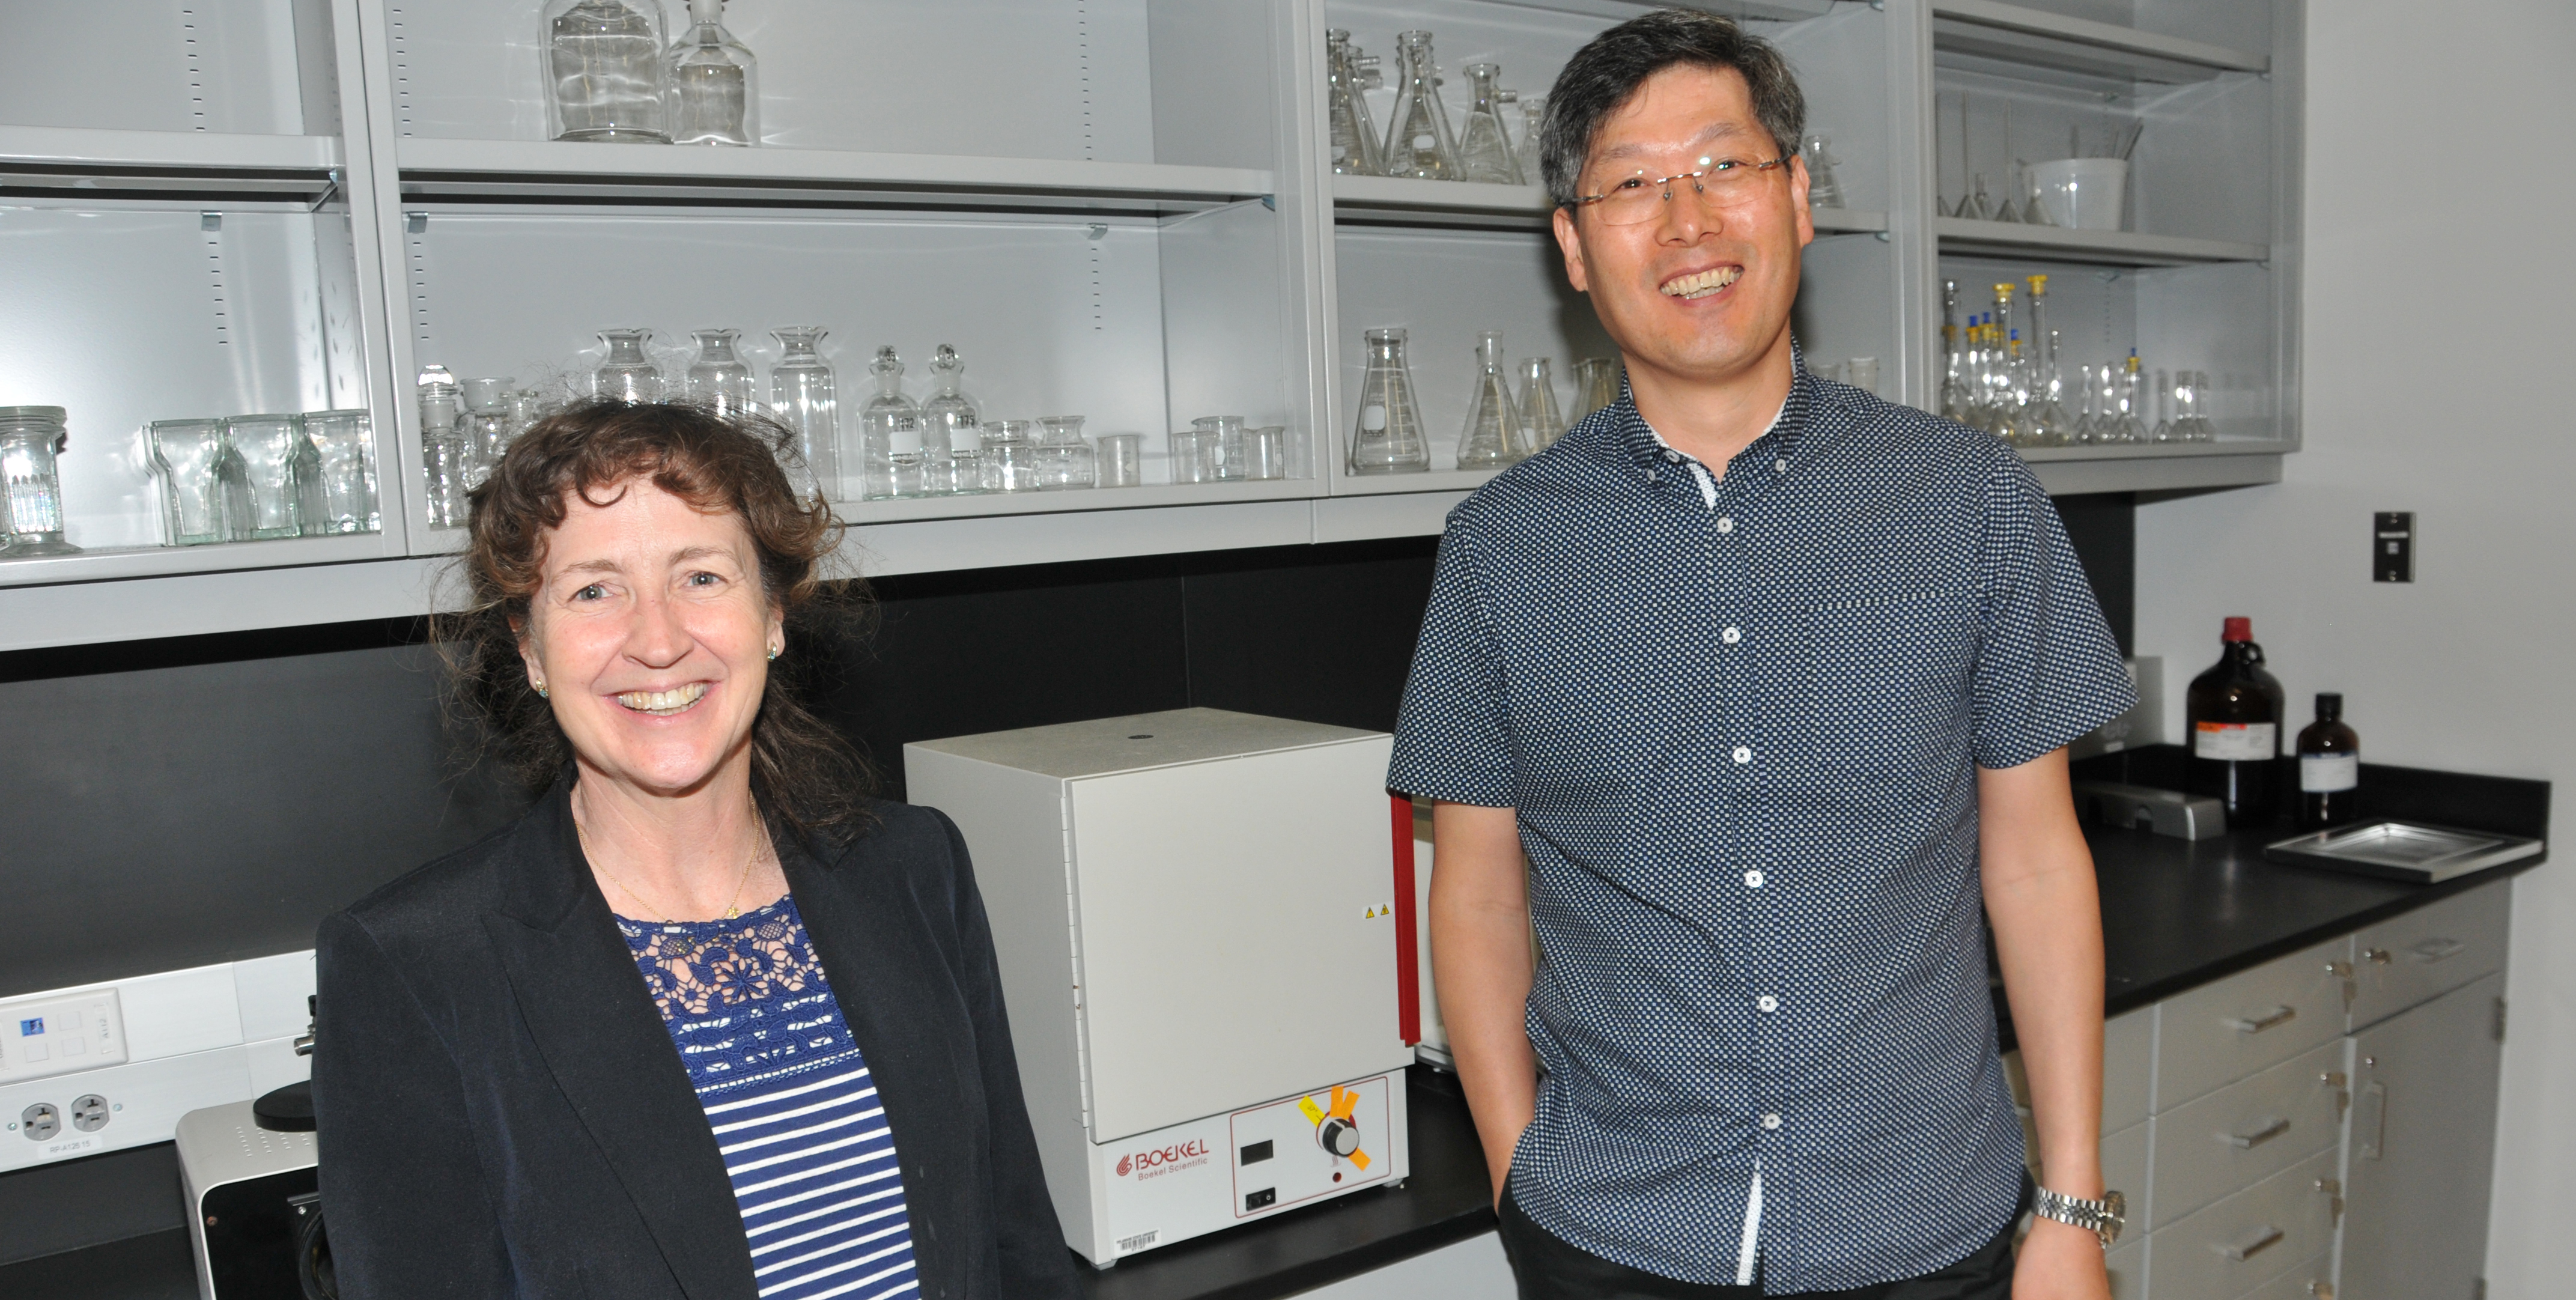 Dr. Melissa Harrington and Hwan Kim are the co-principal investigators who successfully obtained the five-year grant from the National Institute of General Medical Sciences.